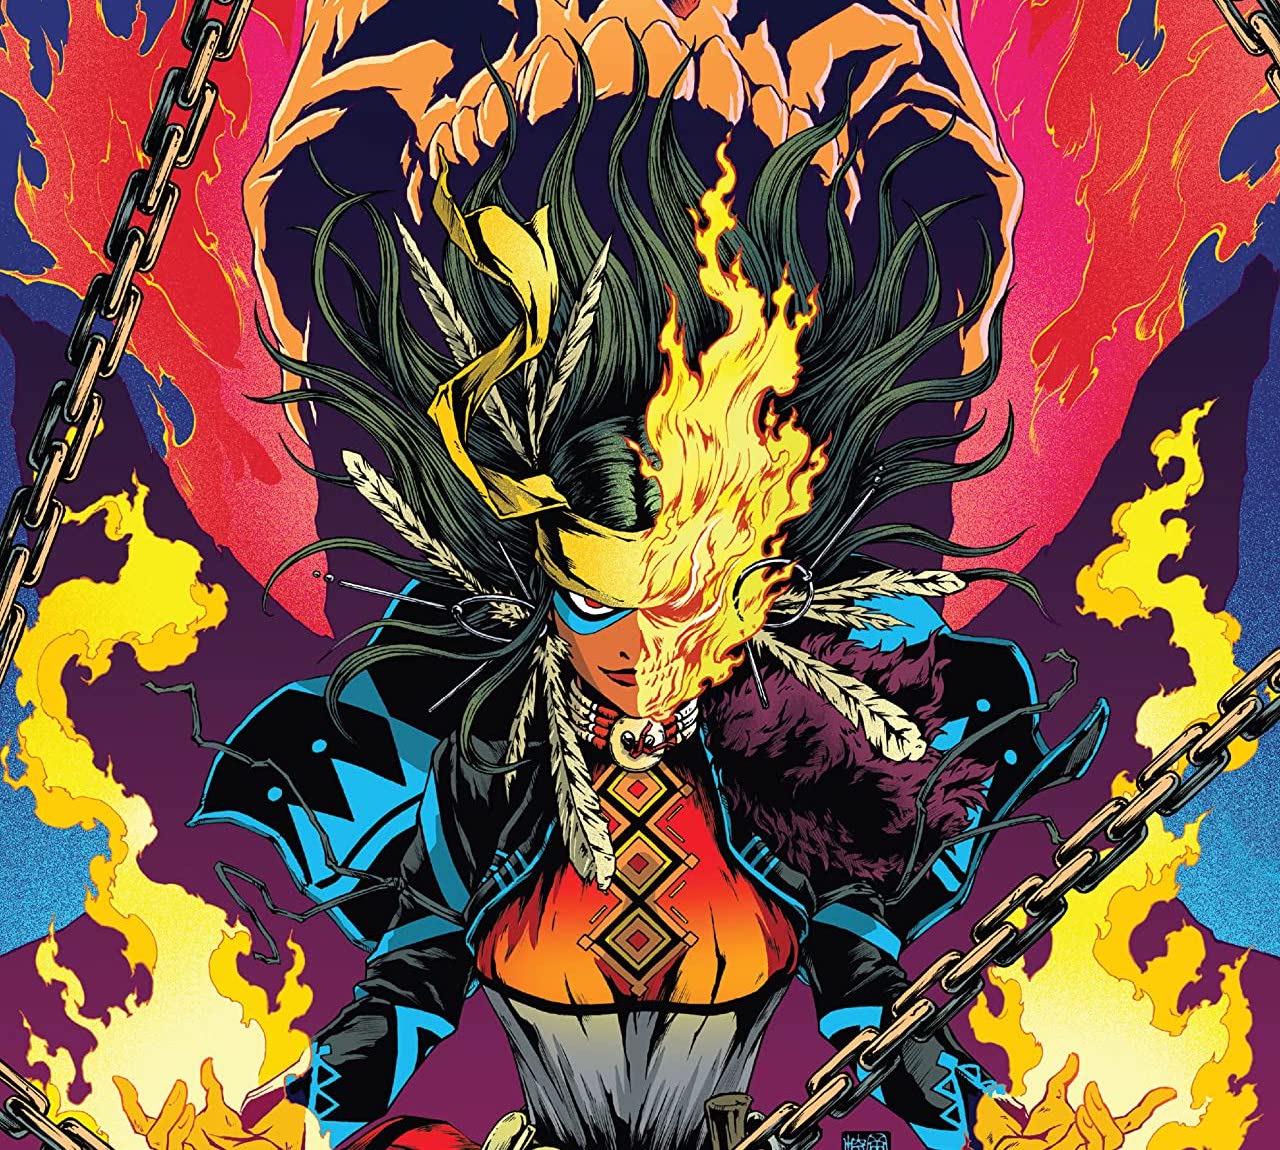 'Spirits of Vengeance: Spirit Rider' #1 is a must read for Ghost Rider and Demon Rider fans